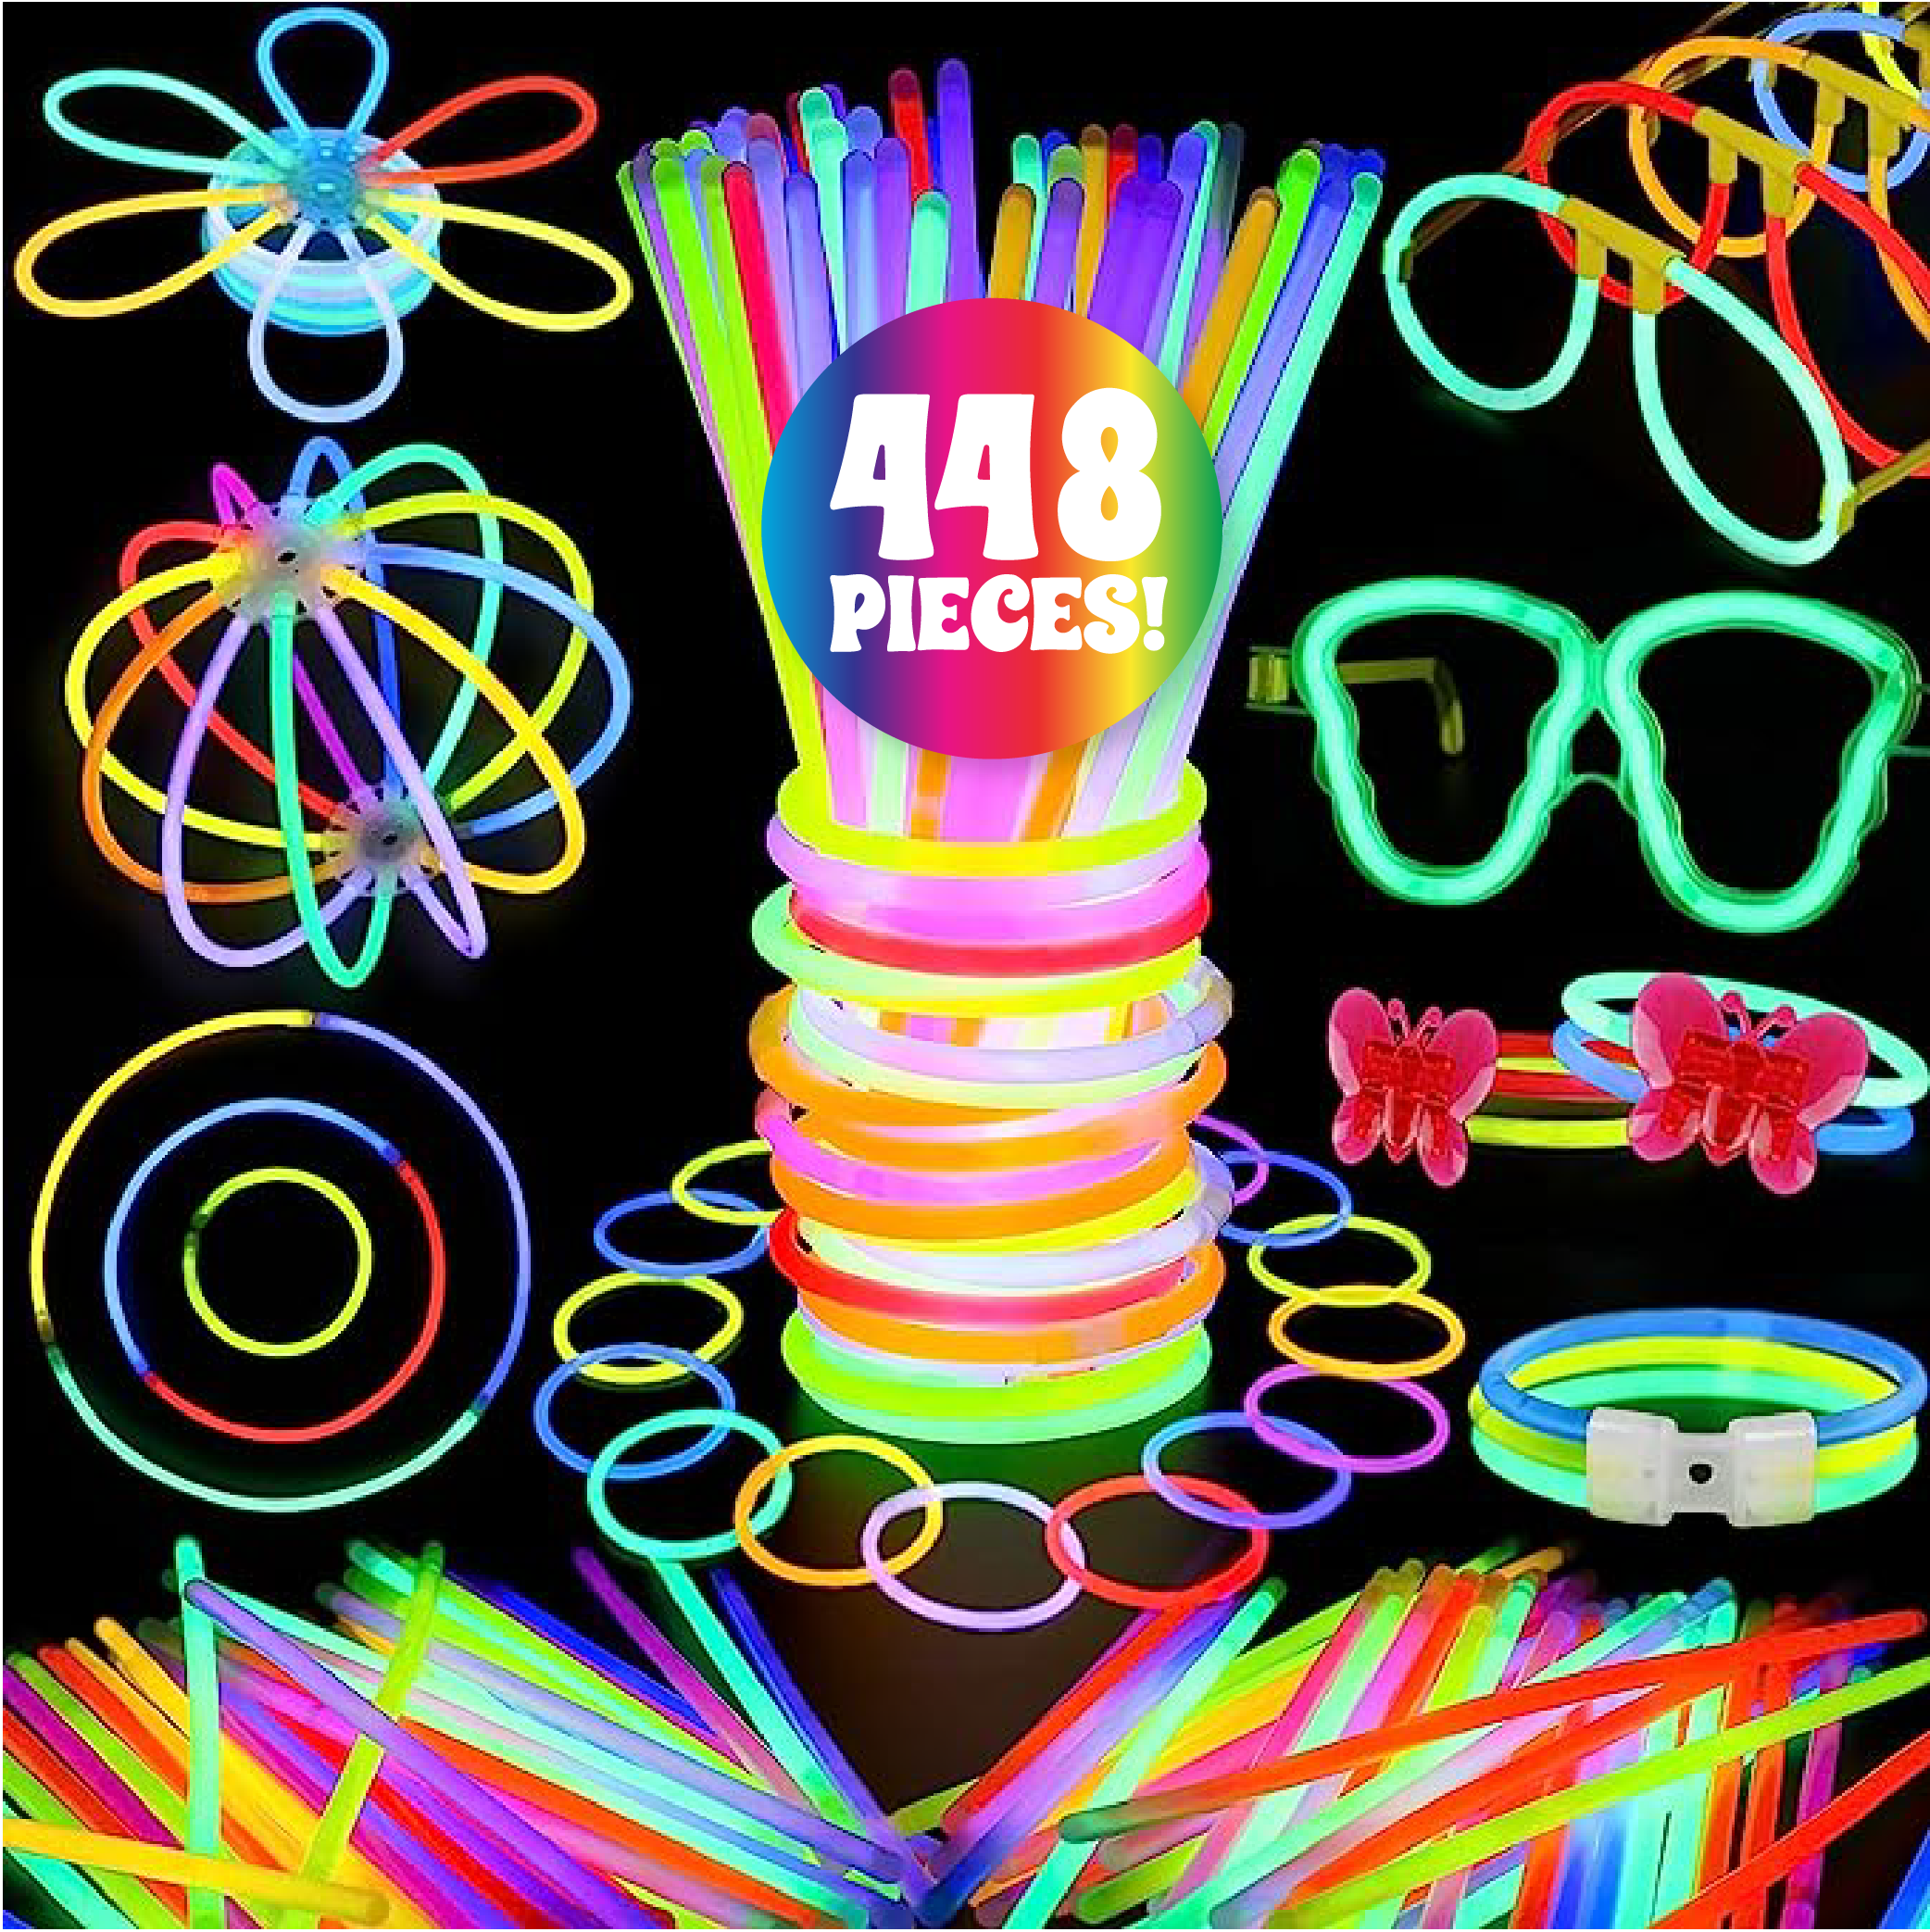 Exquisite 200-Count 22-Inch Glowsticks Necklaces Party Pack - Assorted  Colors - Great for 4th of July 